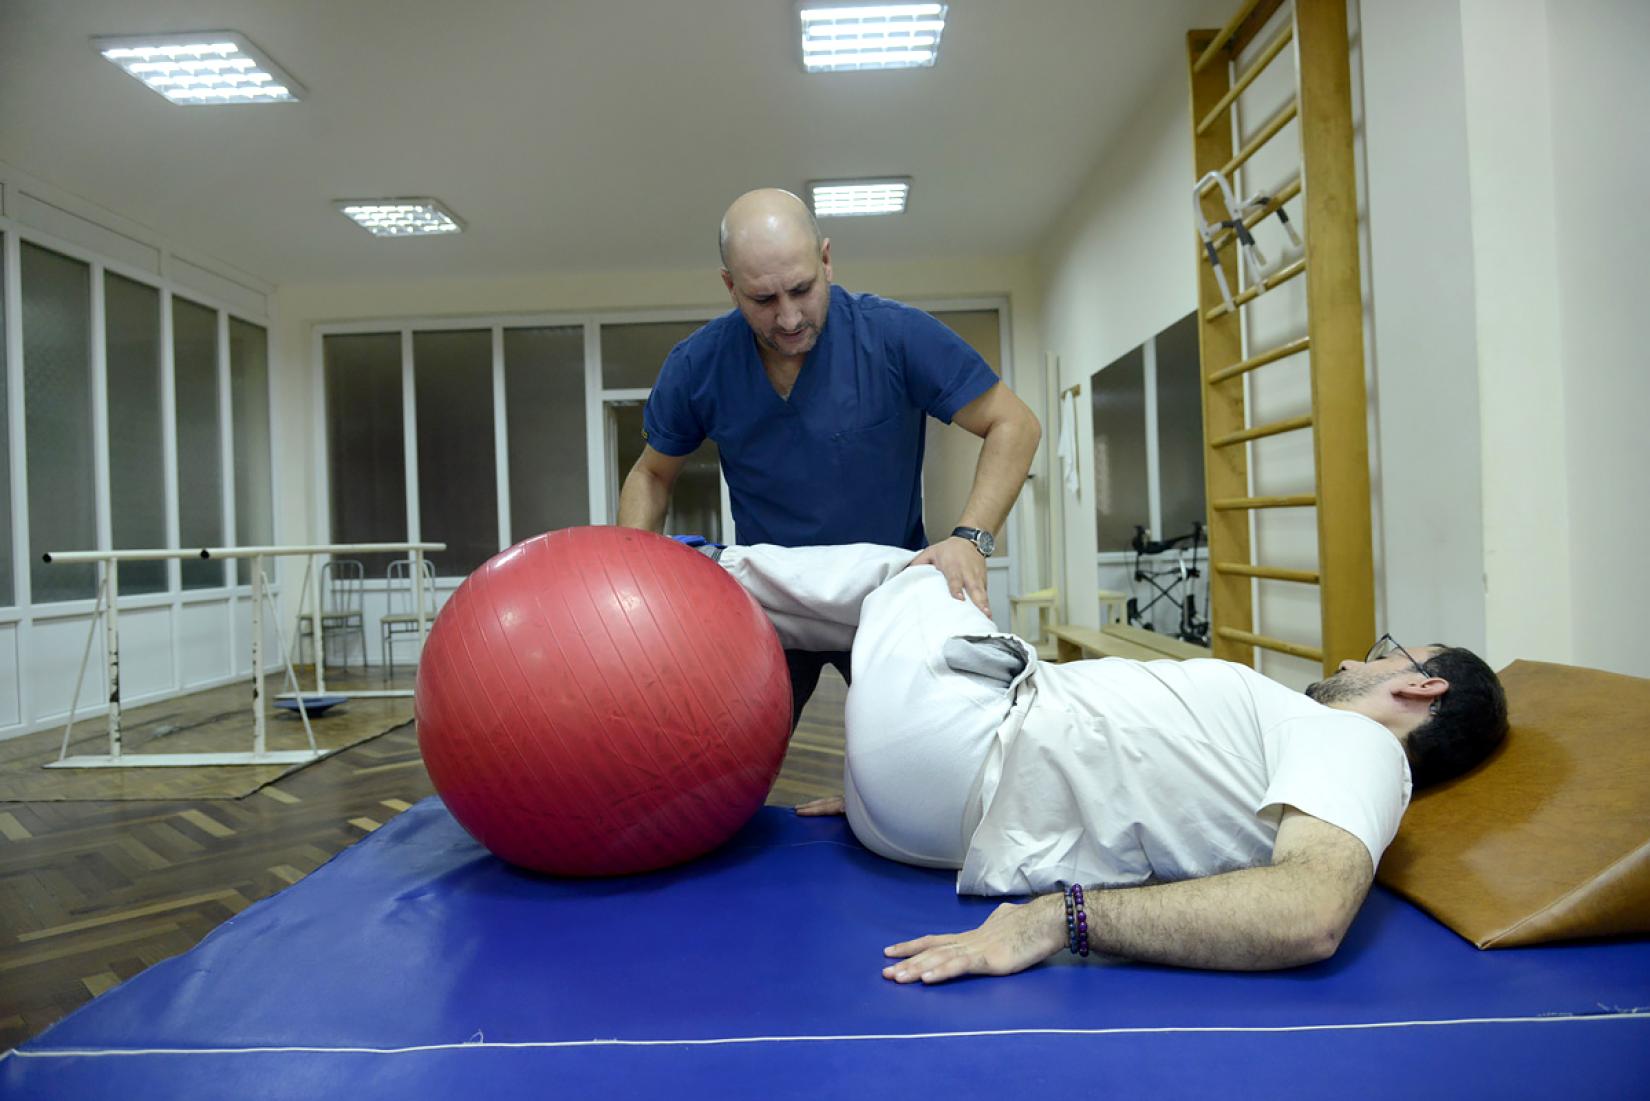 The therapist uses physical therapy techniques for the treatment of a patient after a traumatic brain injury.